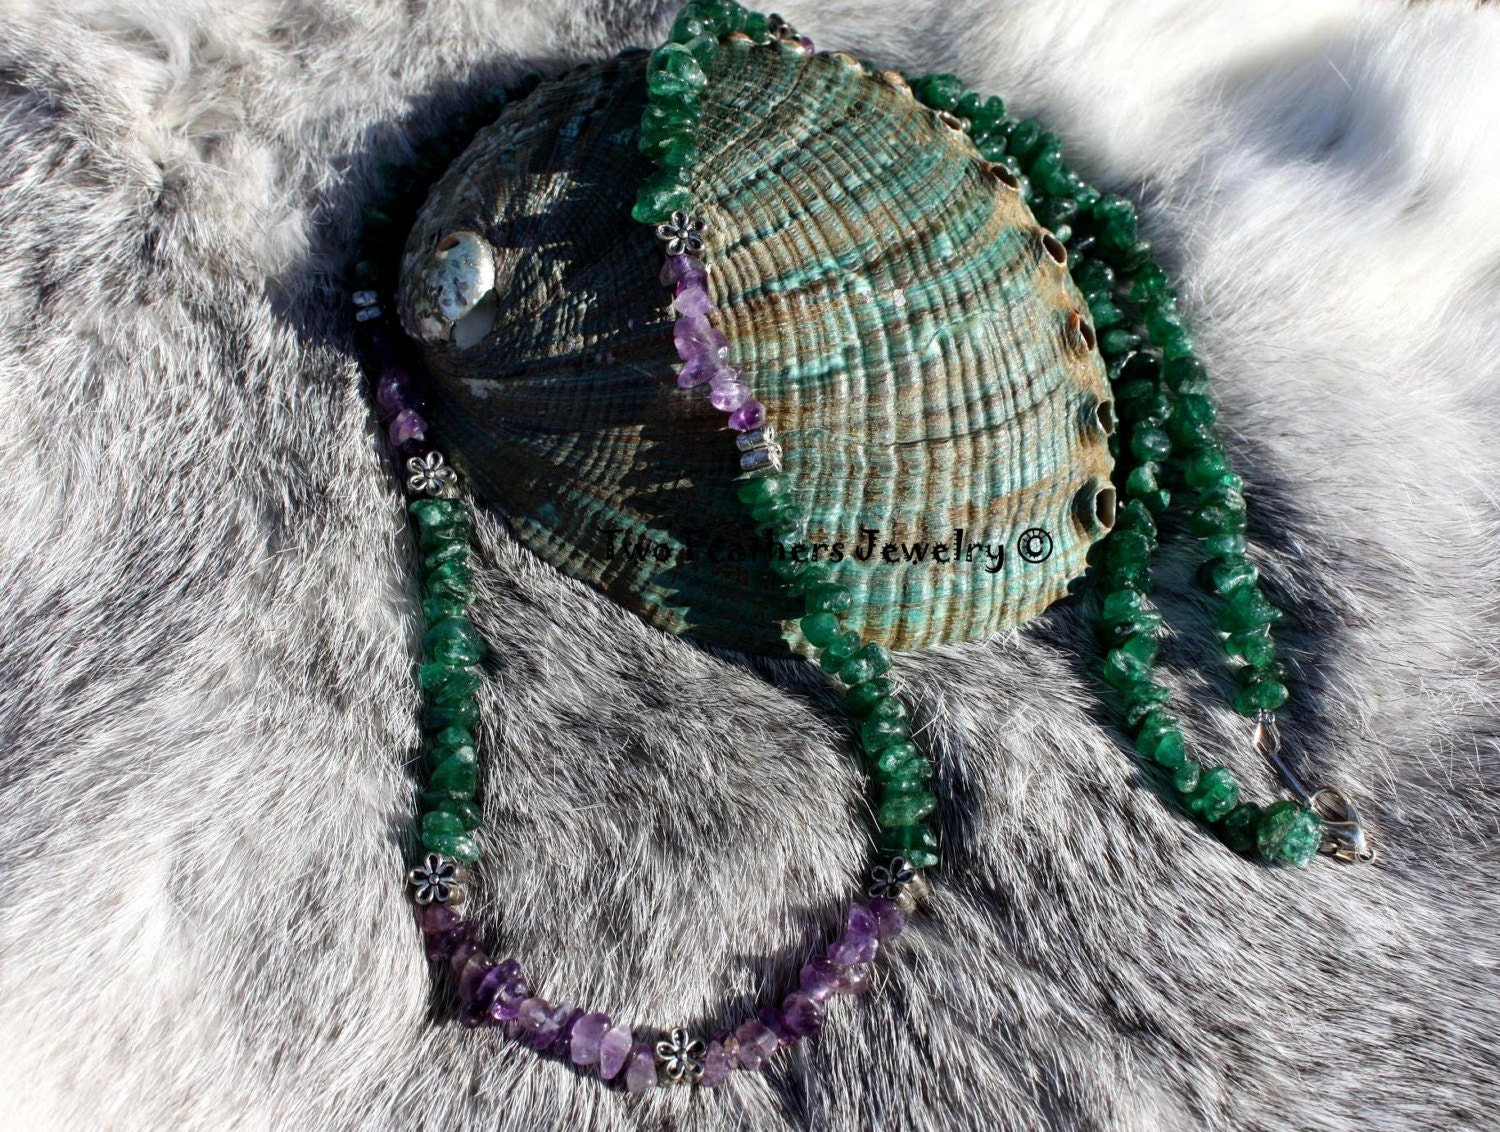 Wildflower Necklace - Amethyst Necklace - Green Aventurine - Green And Purple - Gemstone Necklace - Gift For Her - Nature Inspired - Natural - TwoFeathersJewelry